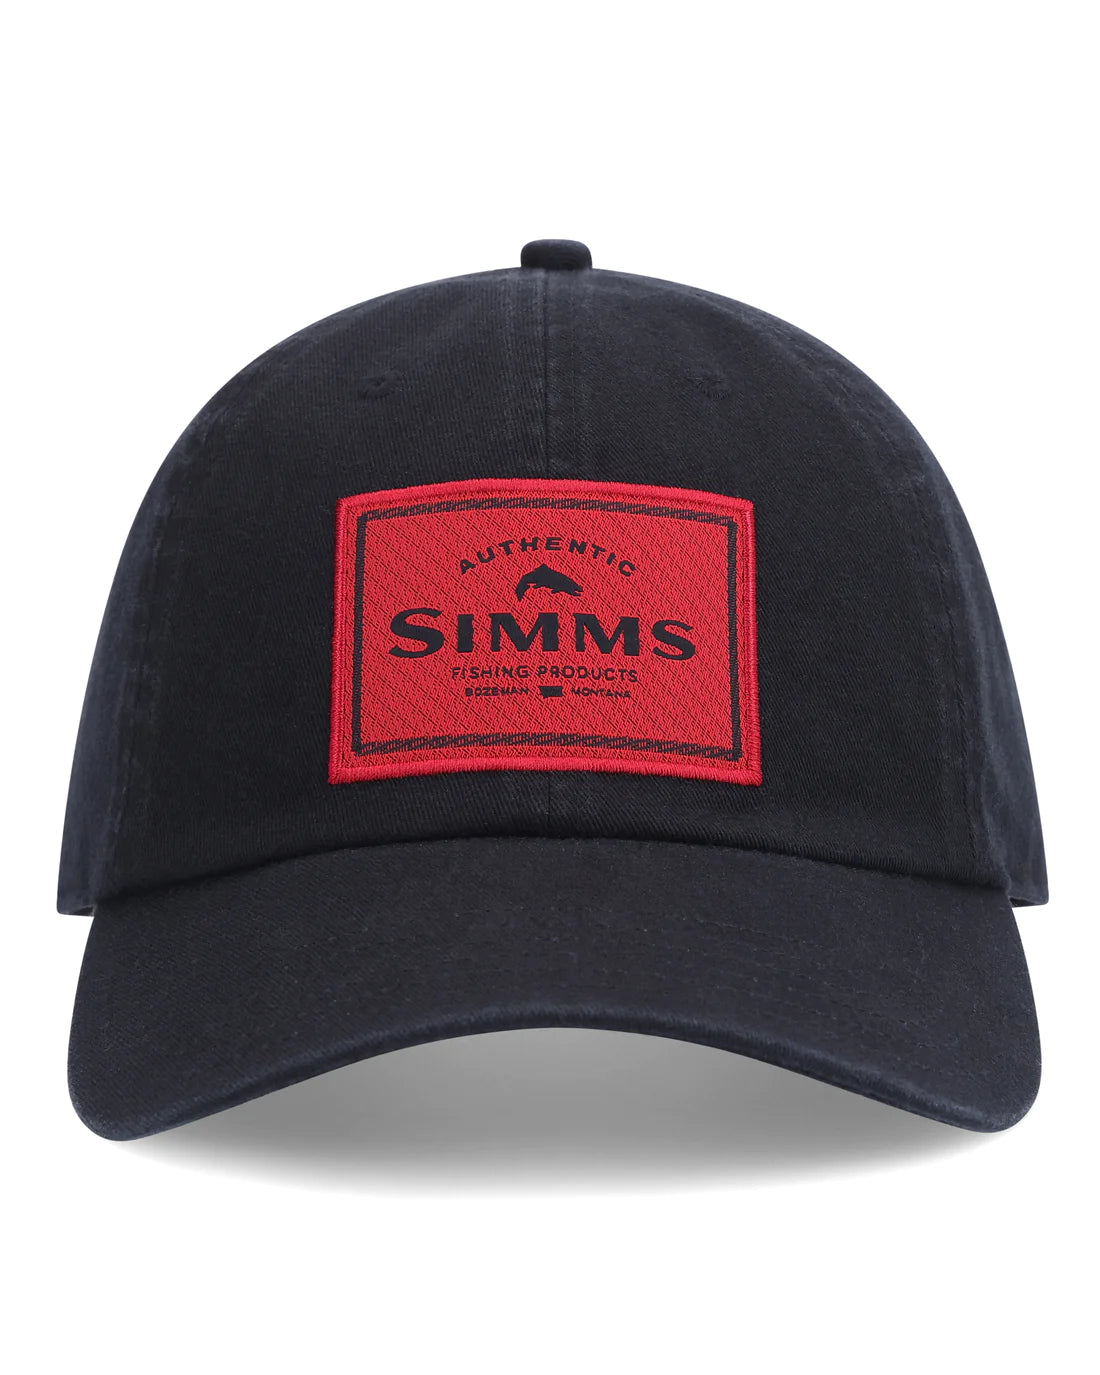 Simms Single Haul Cap - OSFM / BLACK RED - Mansfield Hunting & Fishing - Products to prepare for Corona Virus